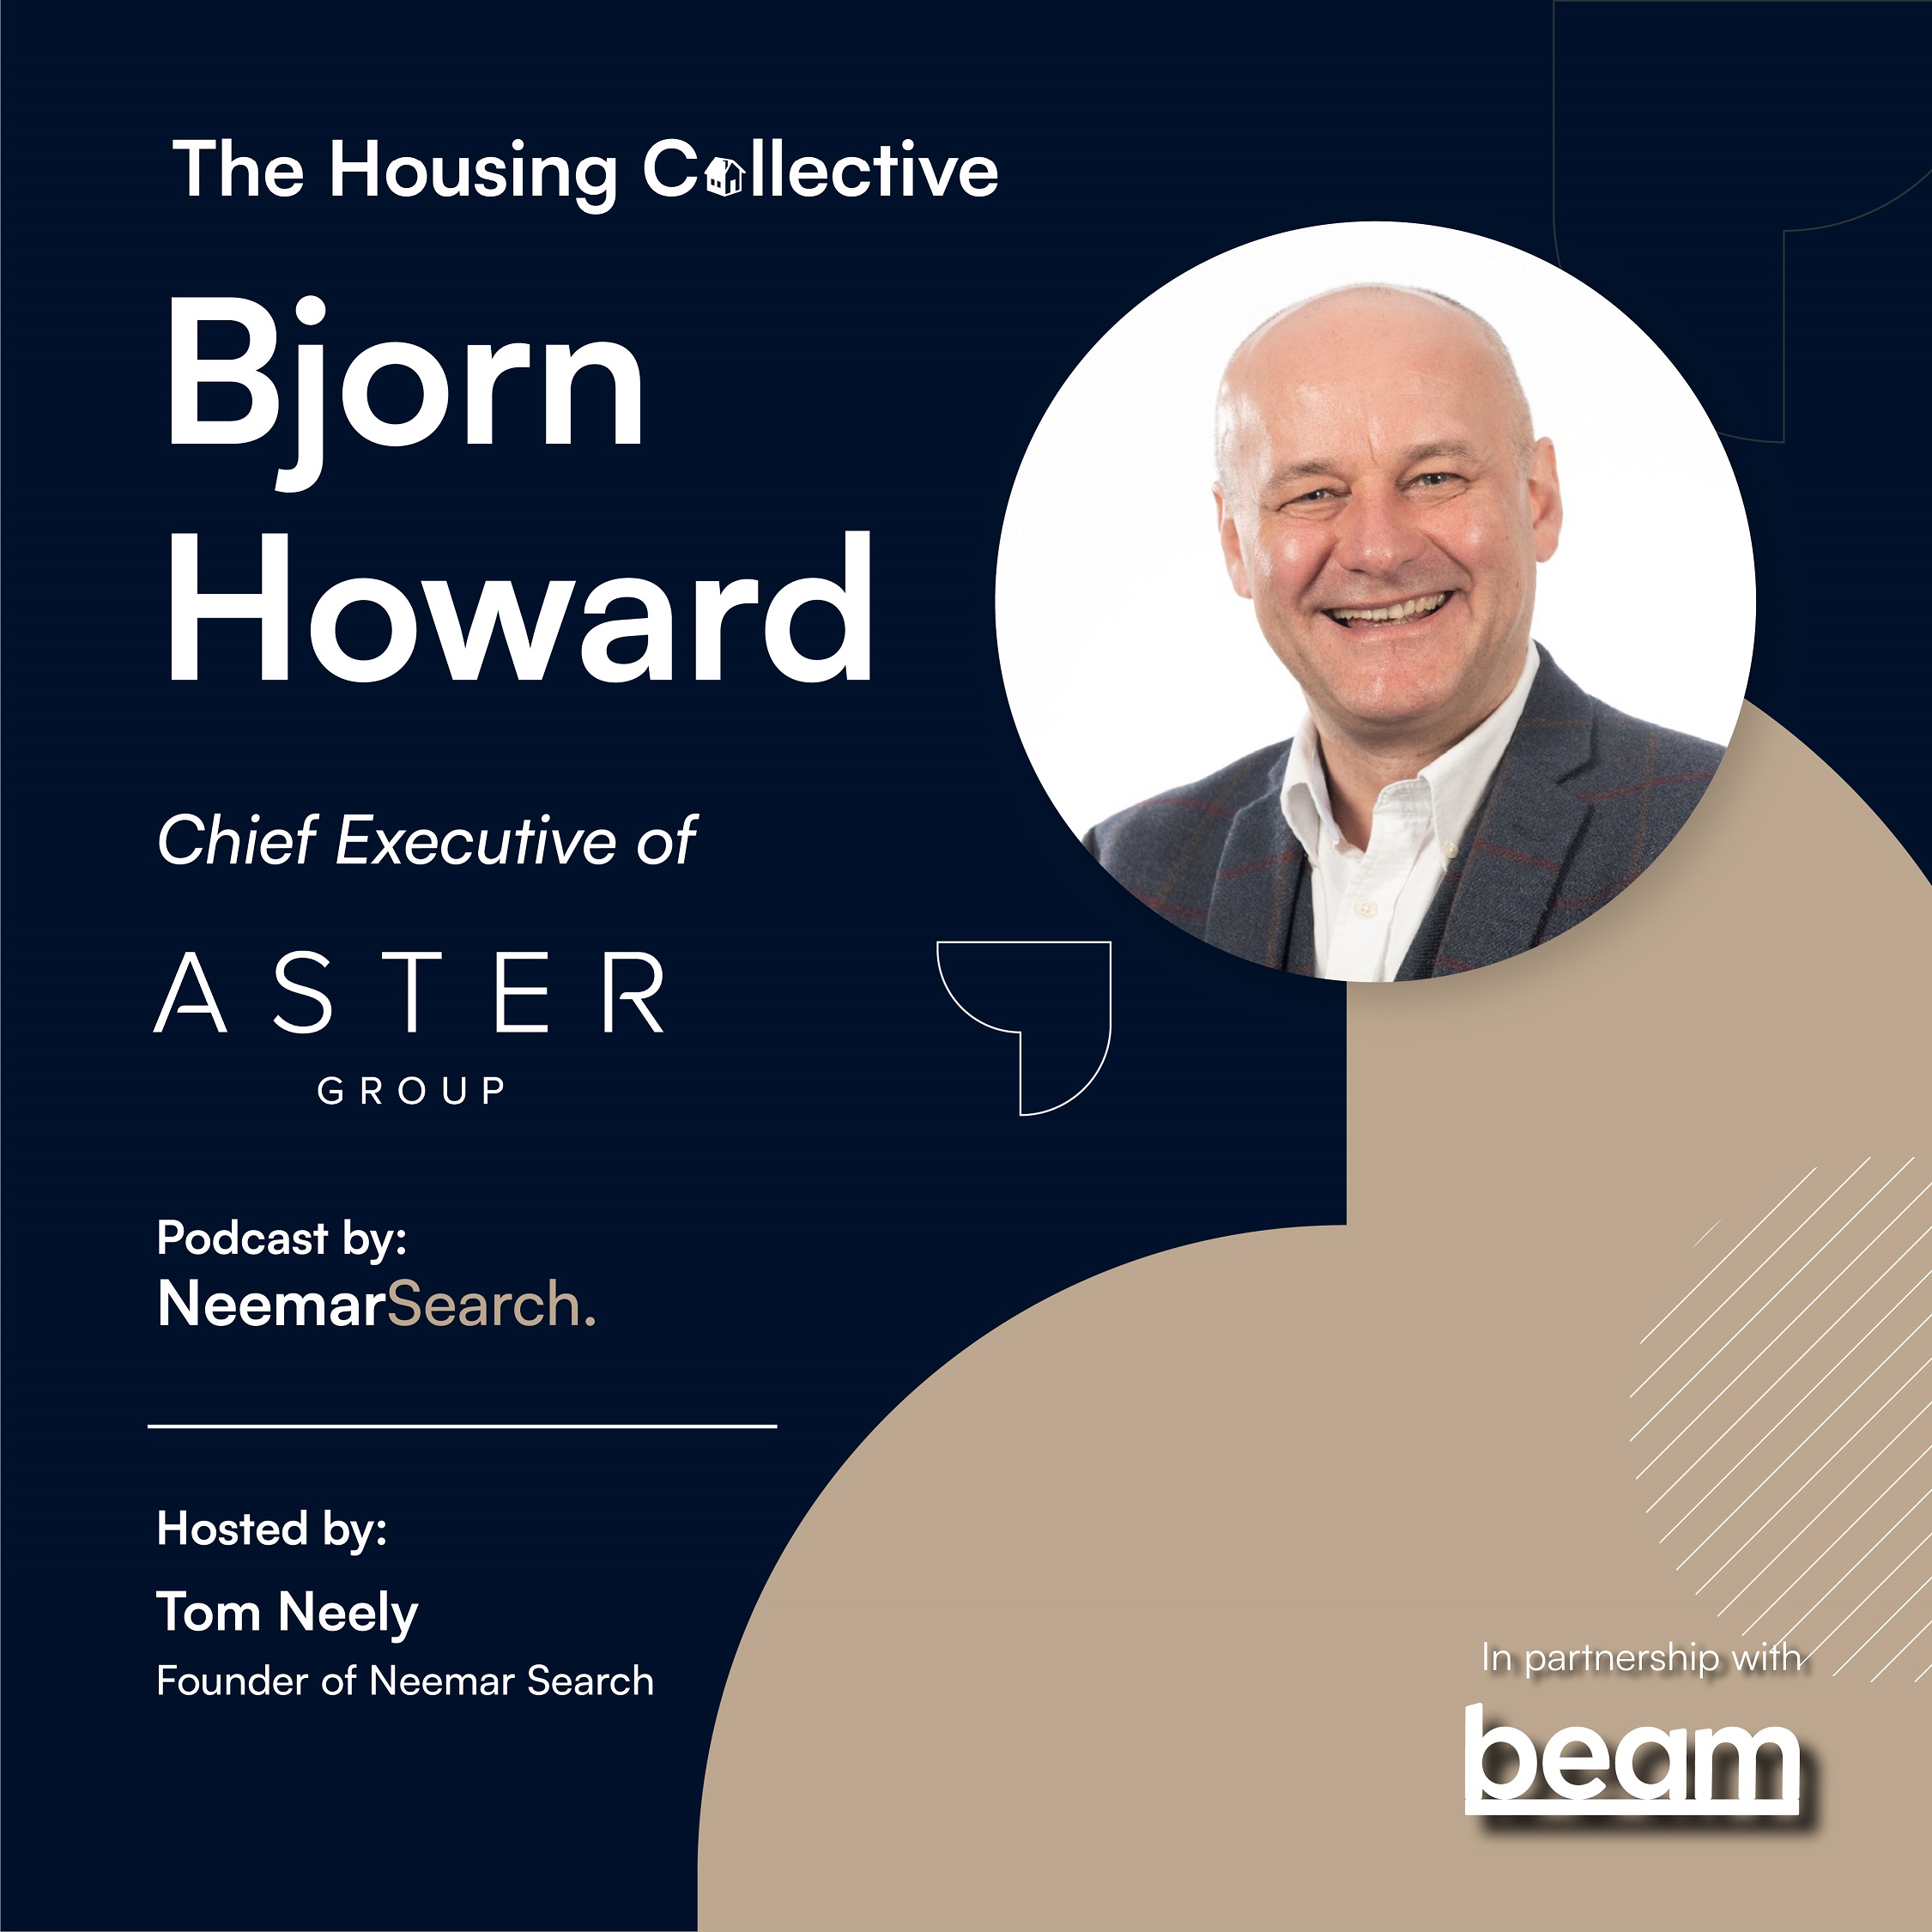 The Housing Collective: Maintaining Company Agility as a Housing Sector CEO